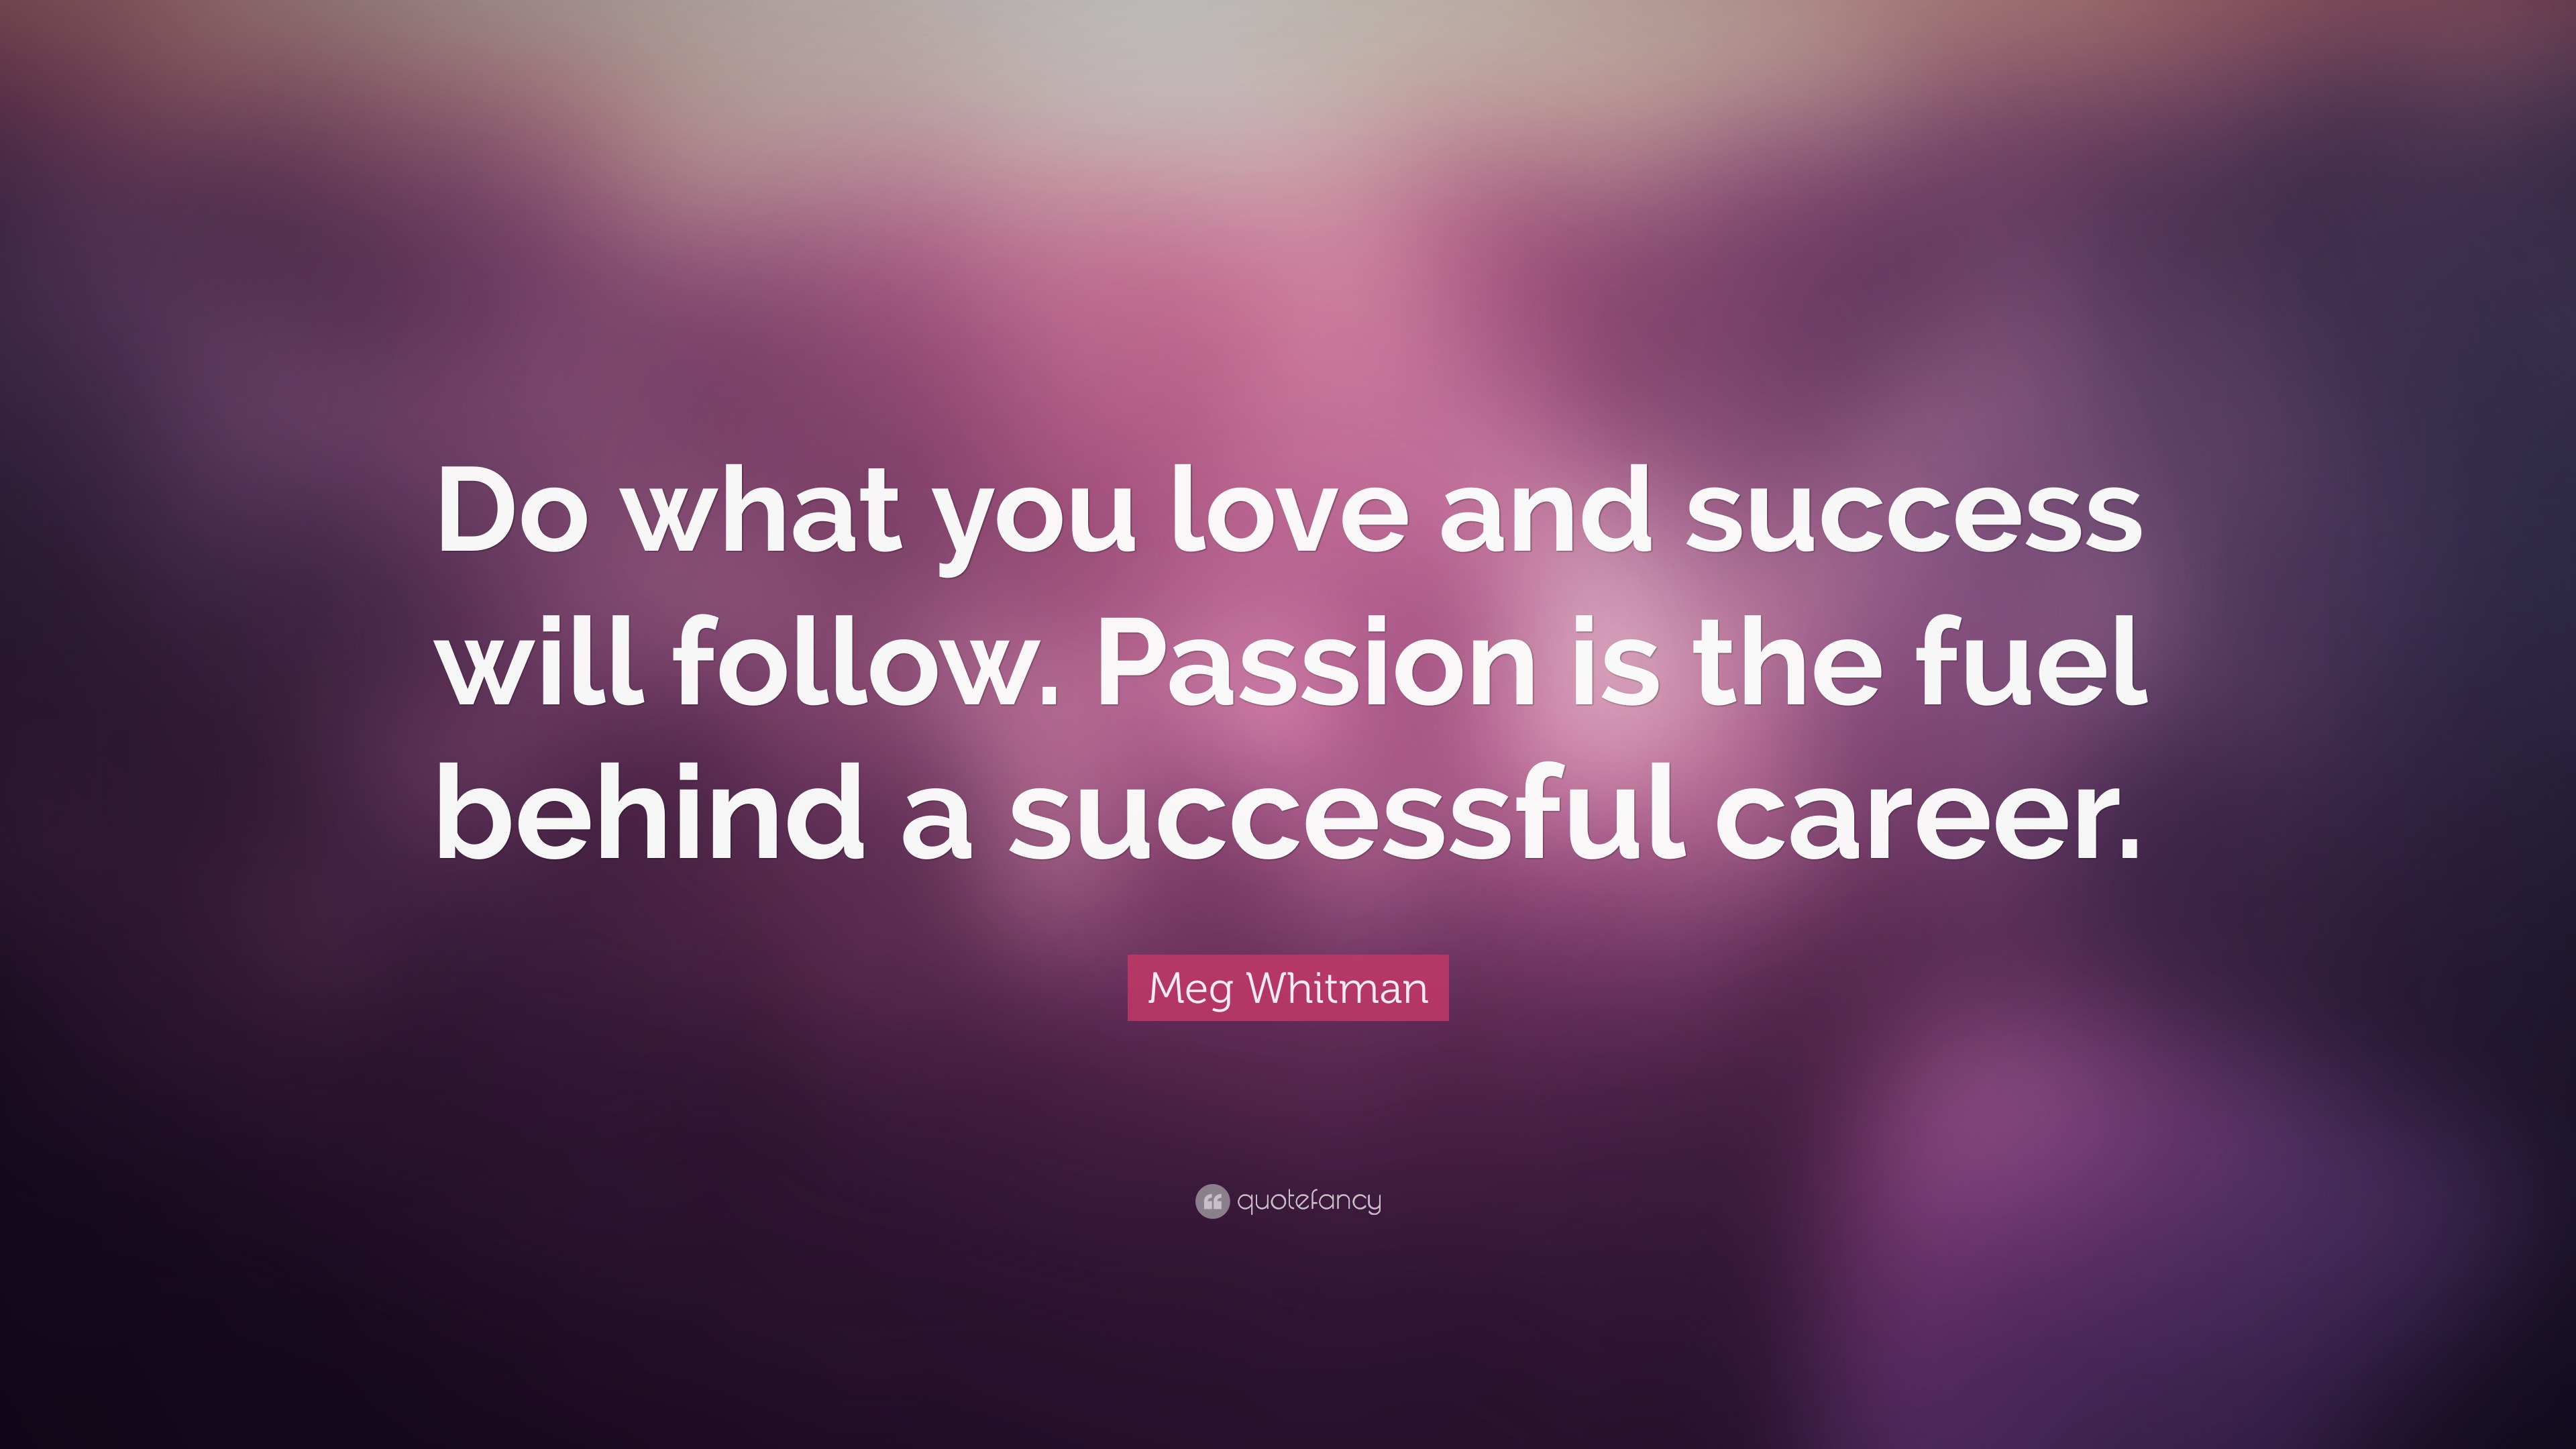 Meg Whitman Quote: "Do what you love and success will follow. Passion is the fuel behind a ...